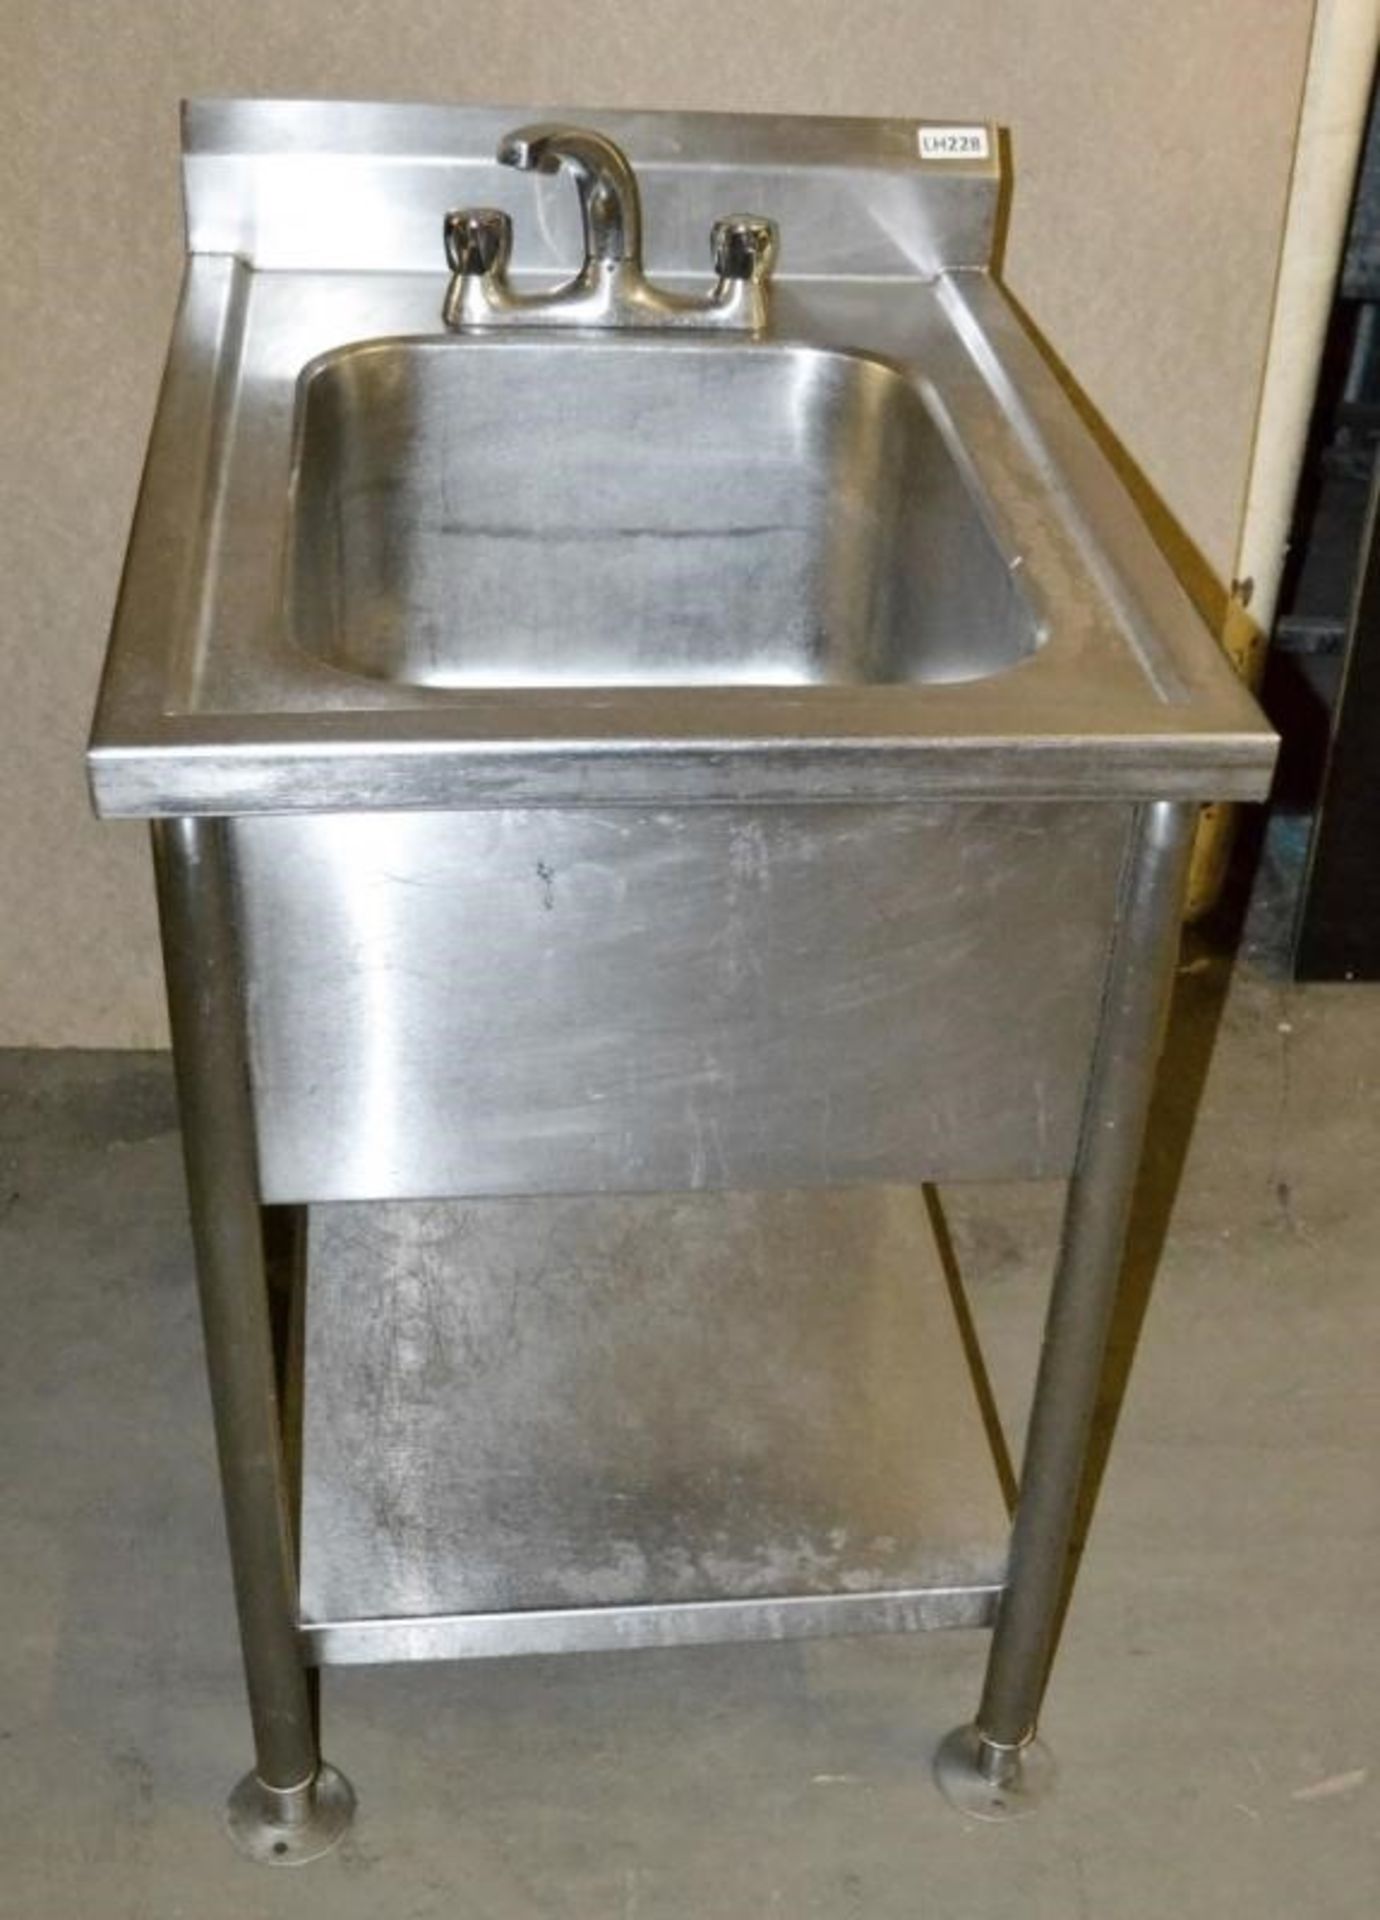 1 x Stainless Steel Commercial Sink Unit / Wash Station With Mixer Tap, Spillage Lip, Splashback and - Image 5 of 7